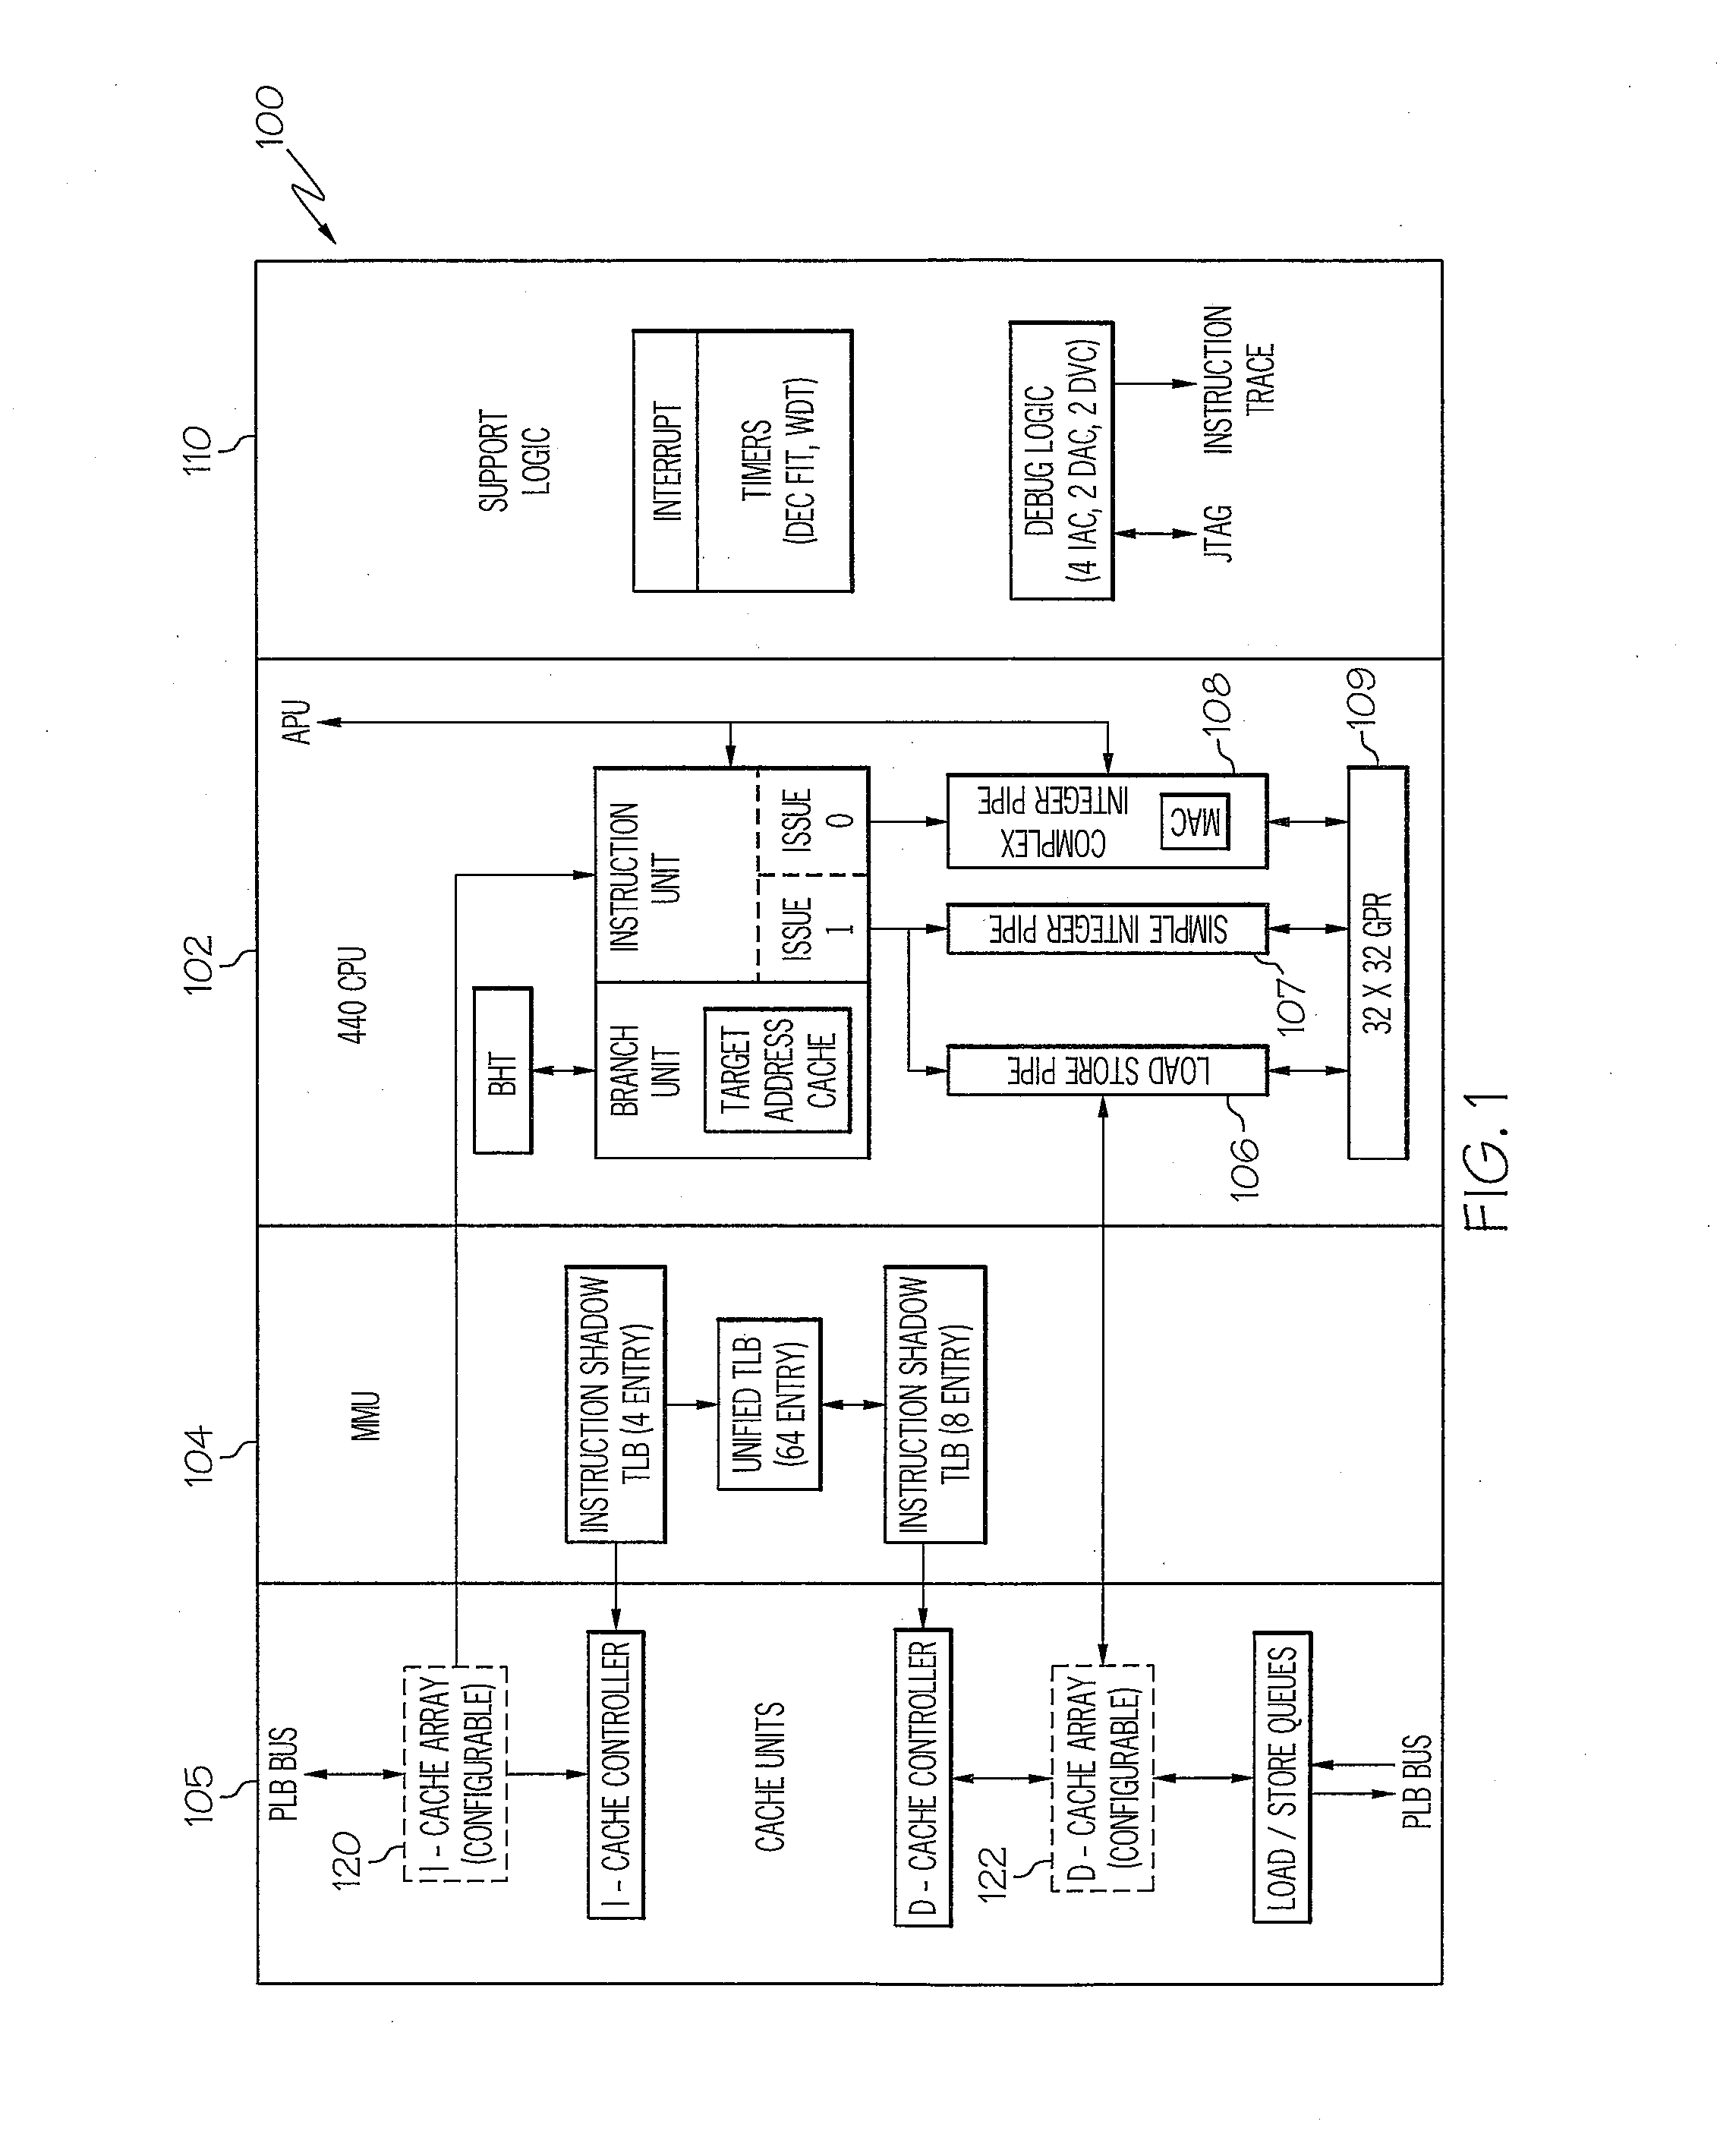 Adaptive execution frequency control method for enhanced instruction throughput